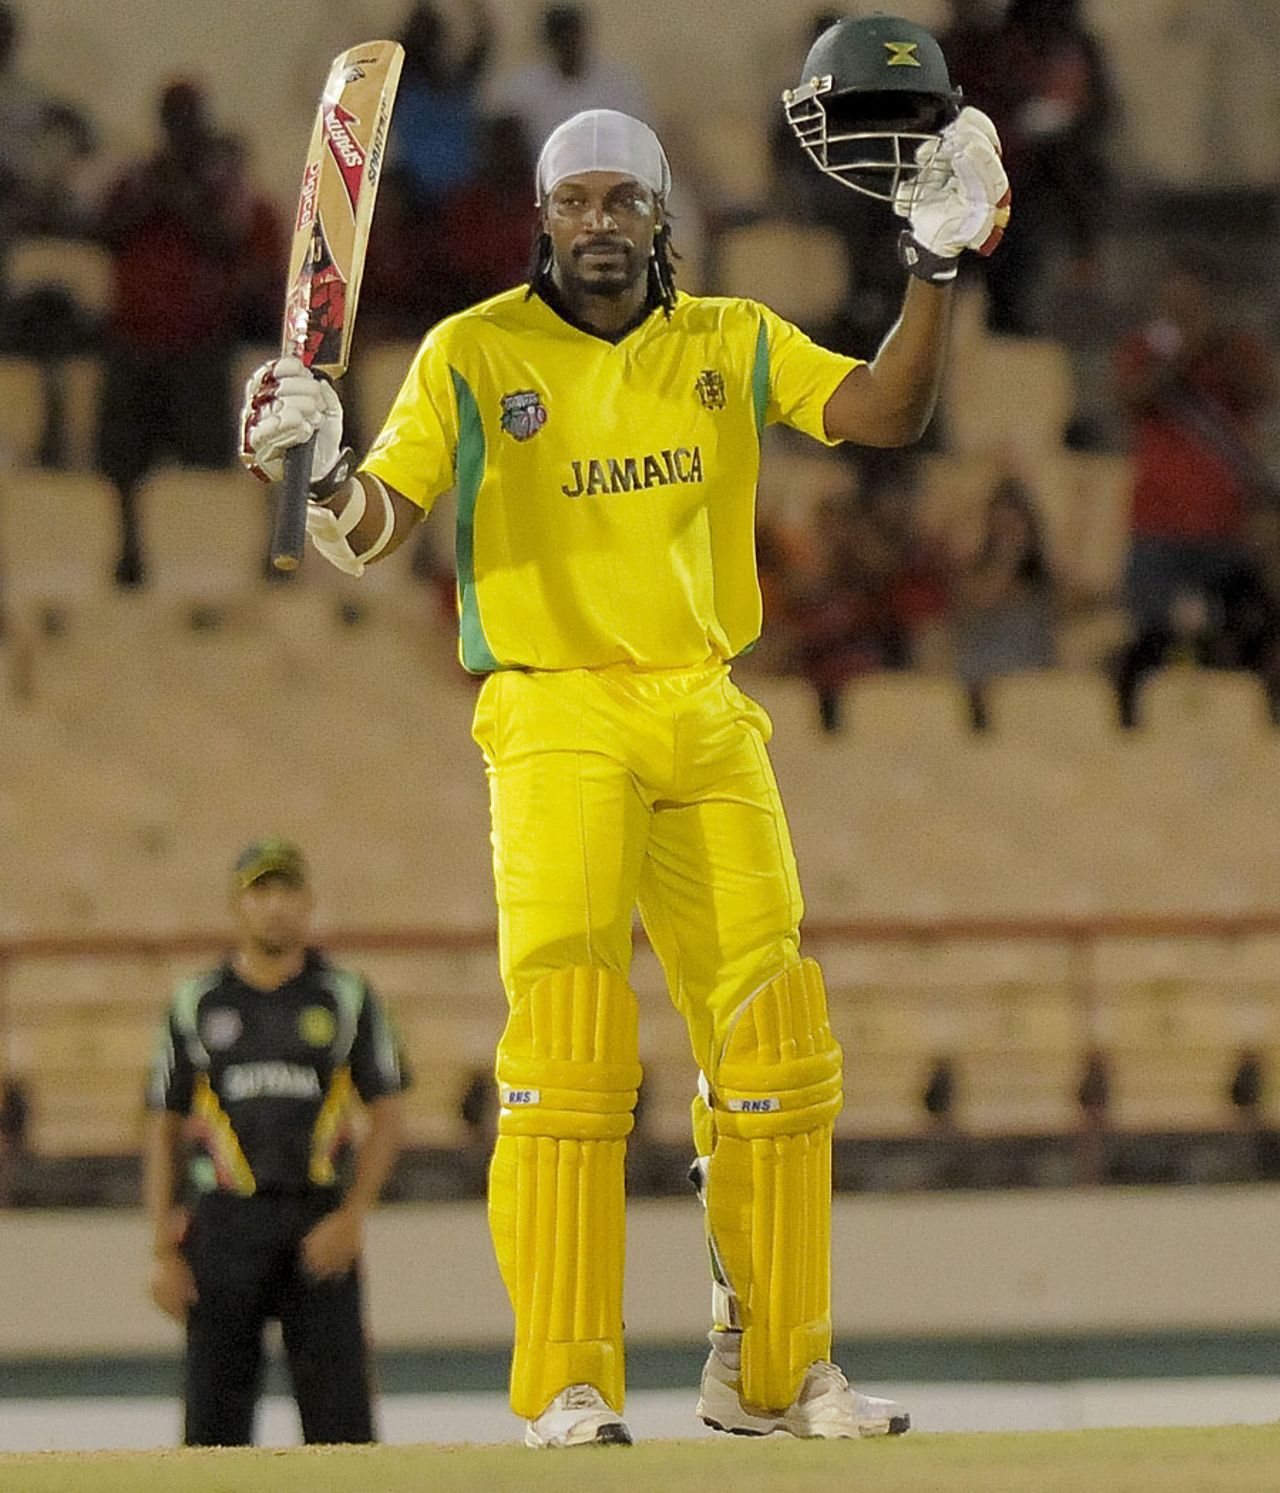 Chris Gayle acknowledges the applause after reaching his century, Jamaica v Guyana, Caribbean T20, playoff, St Lucia, January 19, 2013